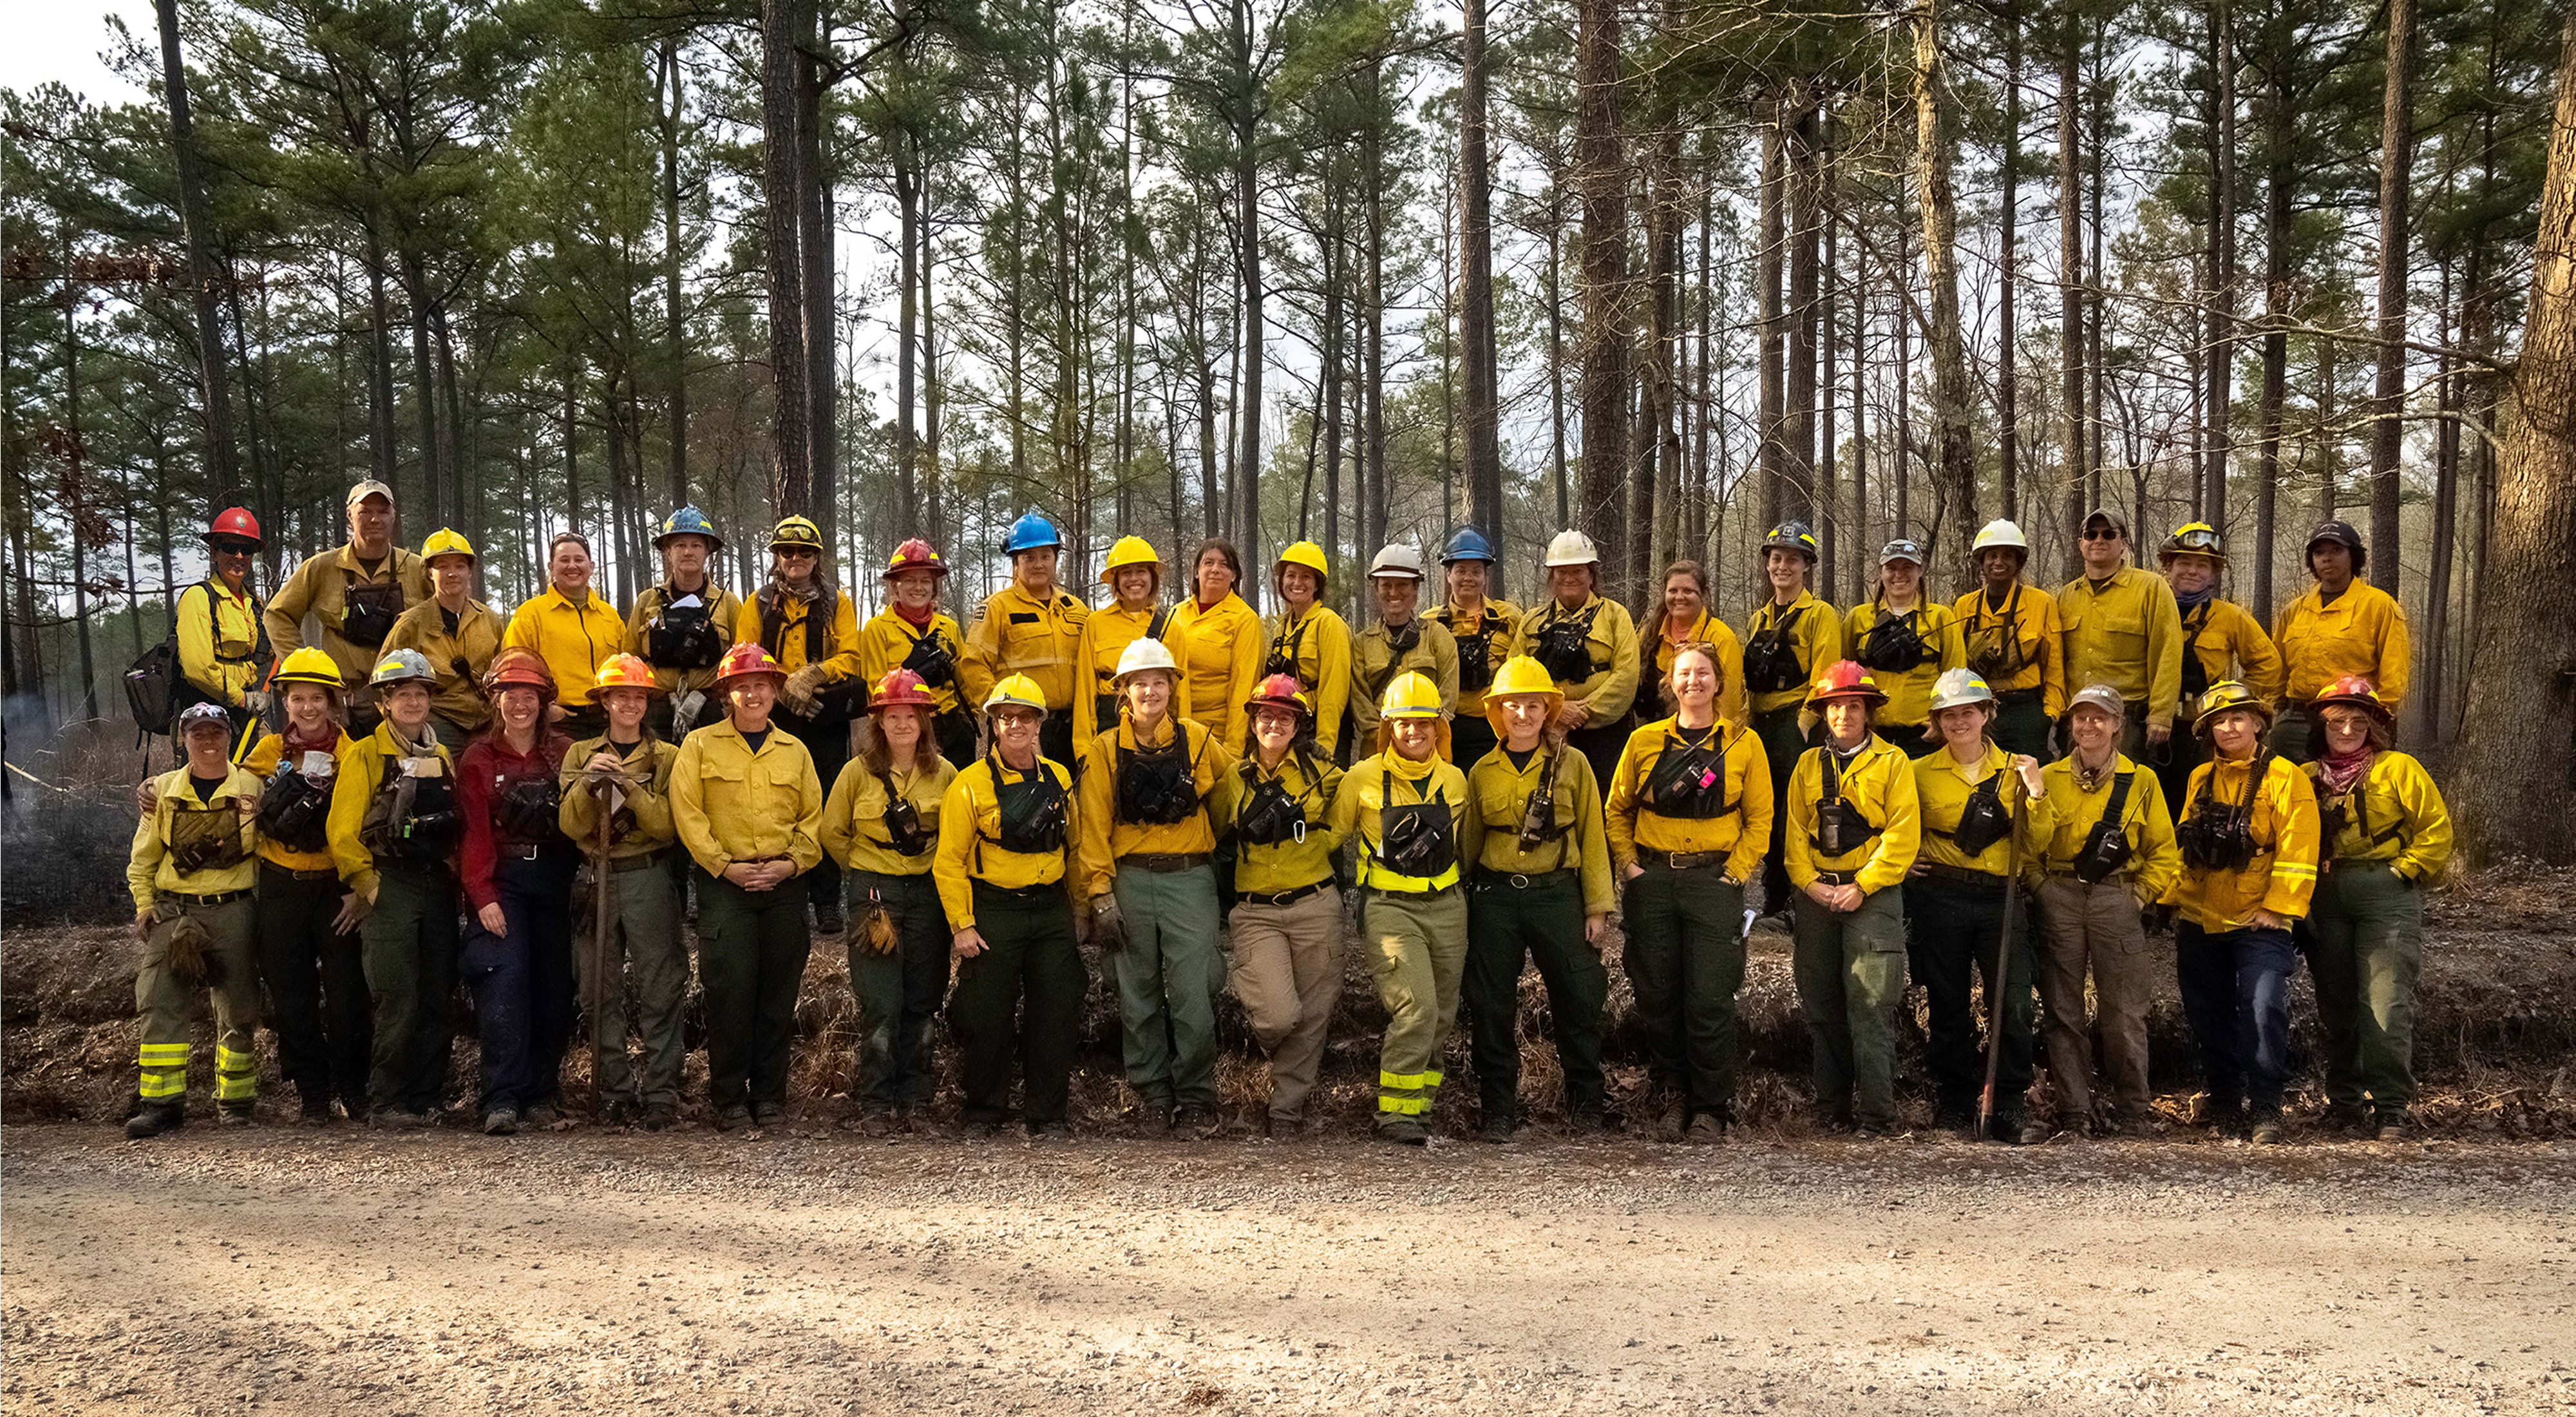 A large group of people pose together at the edge of a pine forest during a fire learning exchange.